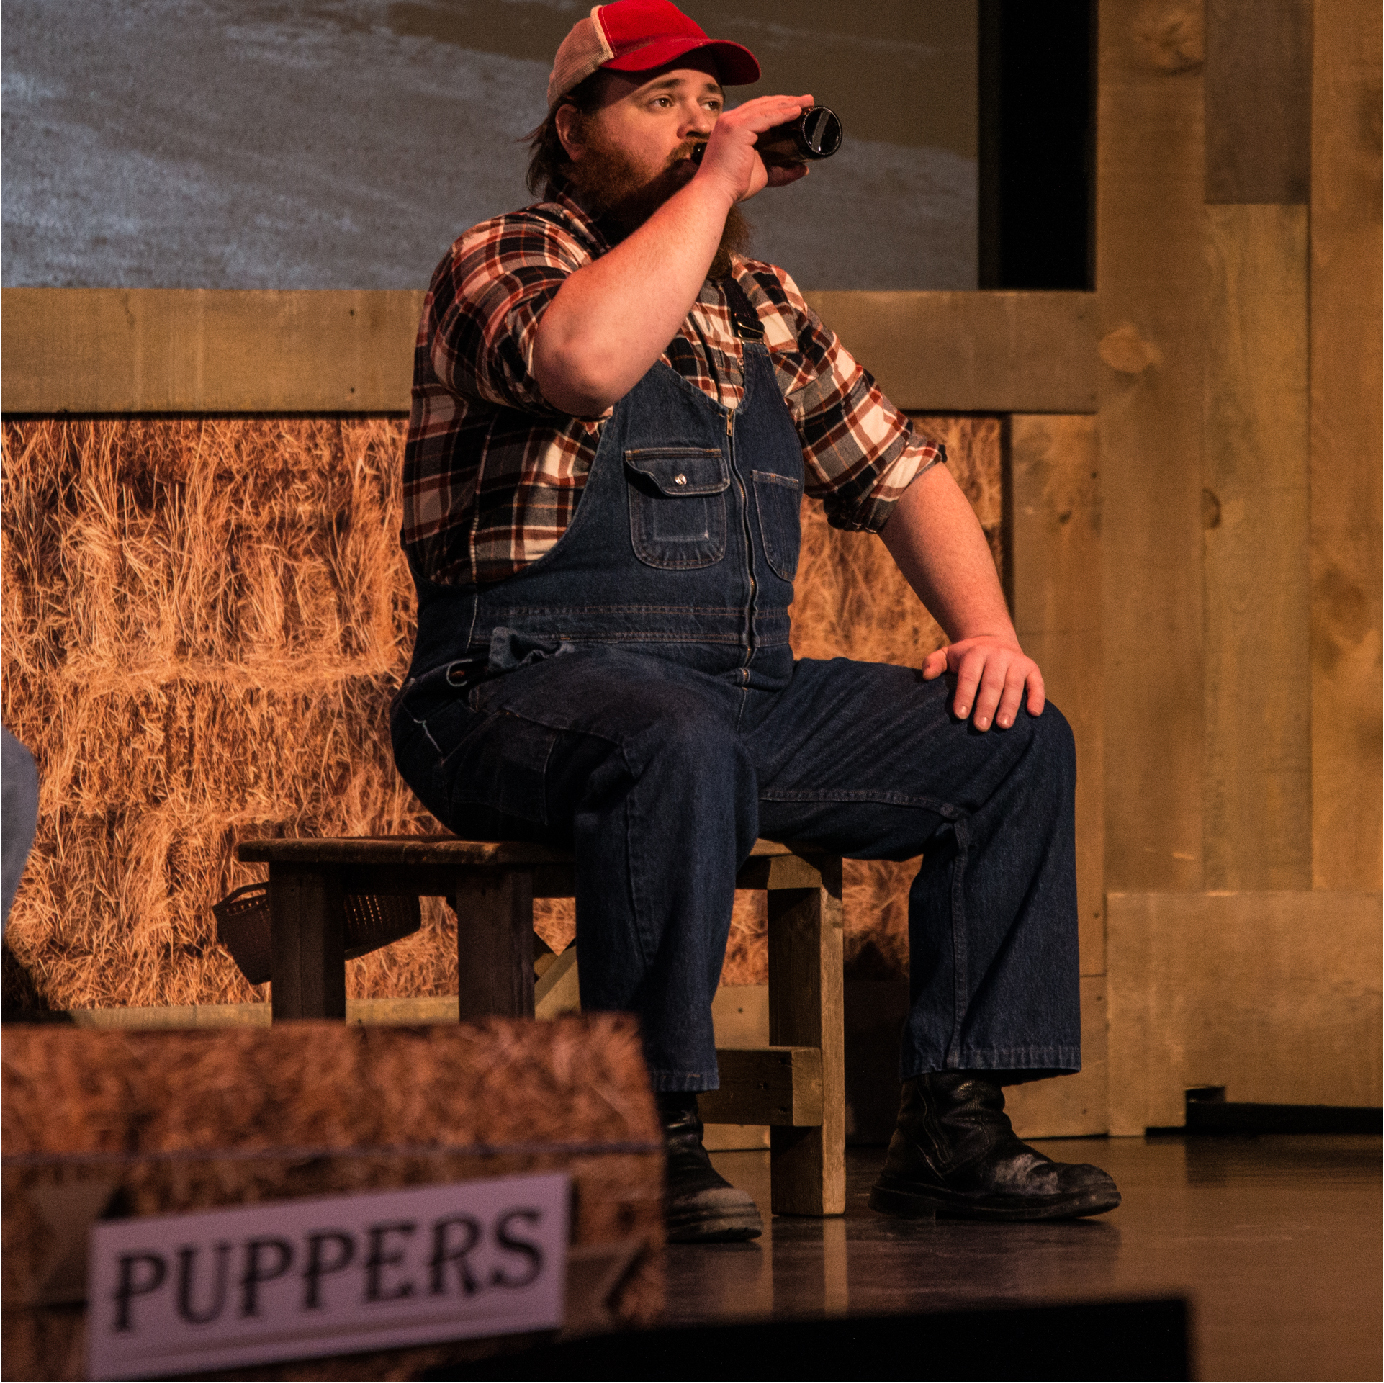 K. Trevor Wilson sits casually on a wooden stool, donned in navy blue overalls, a red and black plaid shirt, and a red baseball cap. With an engaging presence, he takes a sip of Puppers beer, creating a laid-back and authentic atmosphere. The background features hay, and in the foreground, a Puppers sign adds to the rustic charm of the scene.